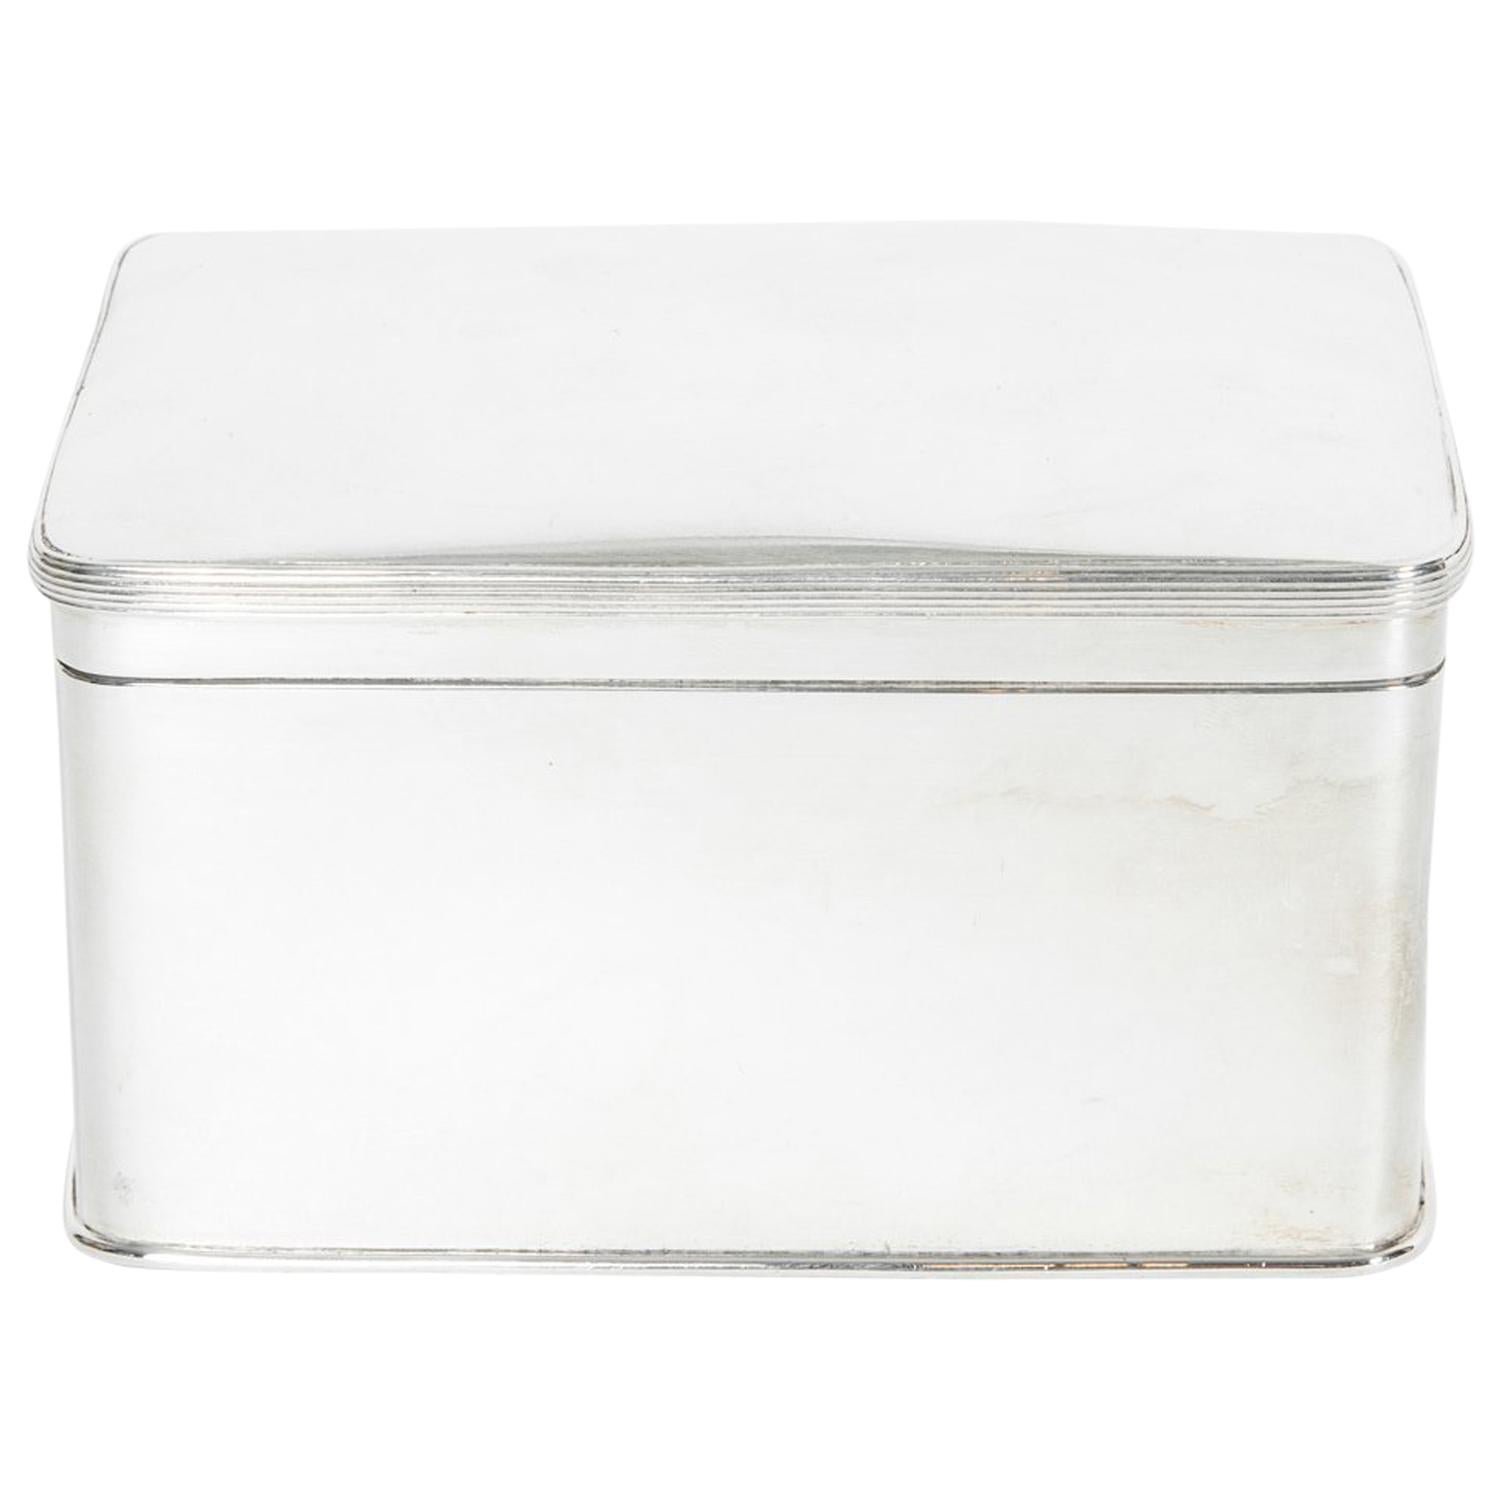 Antique English Silver Plate Covered Box